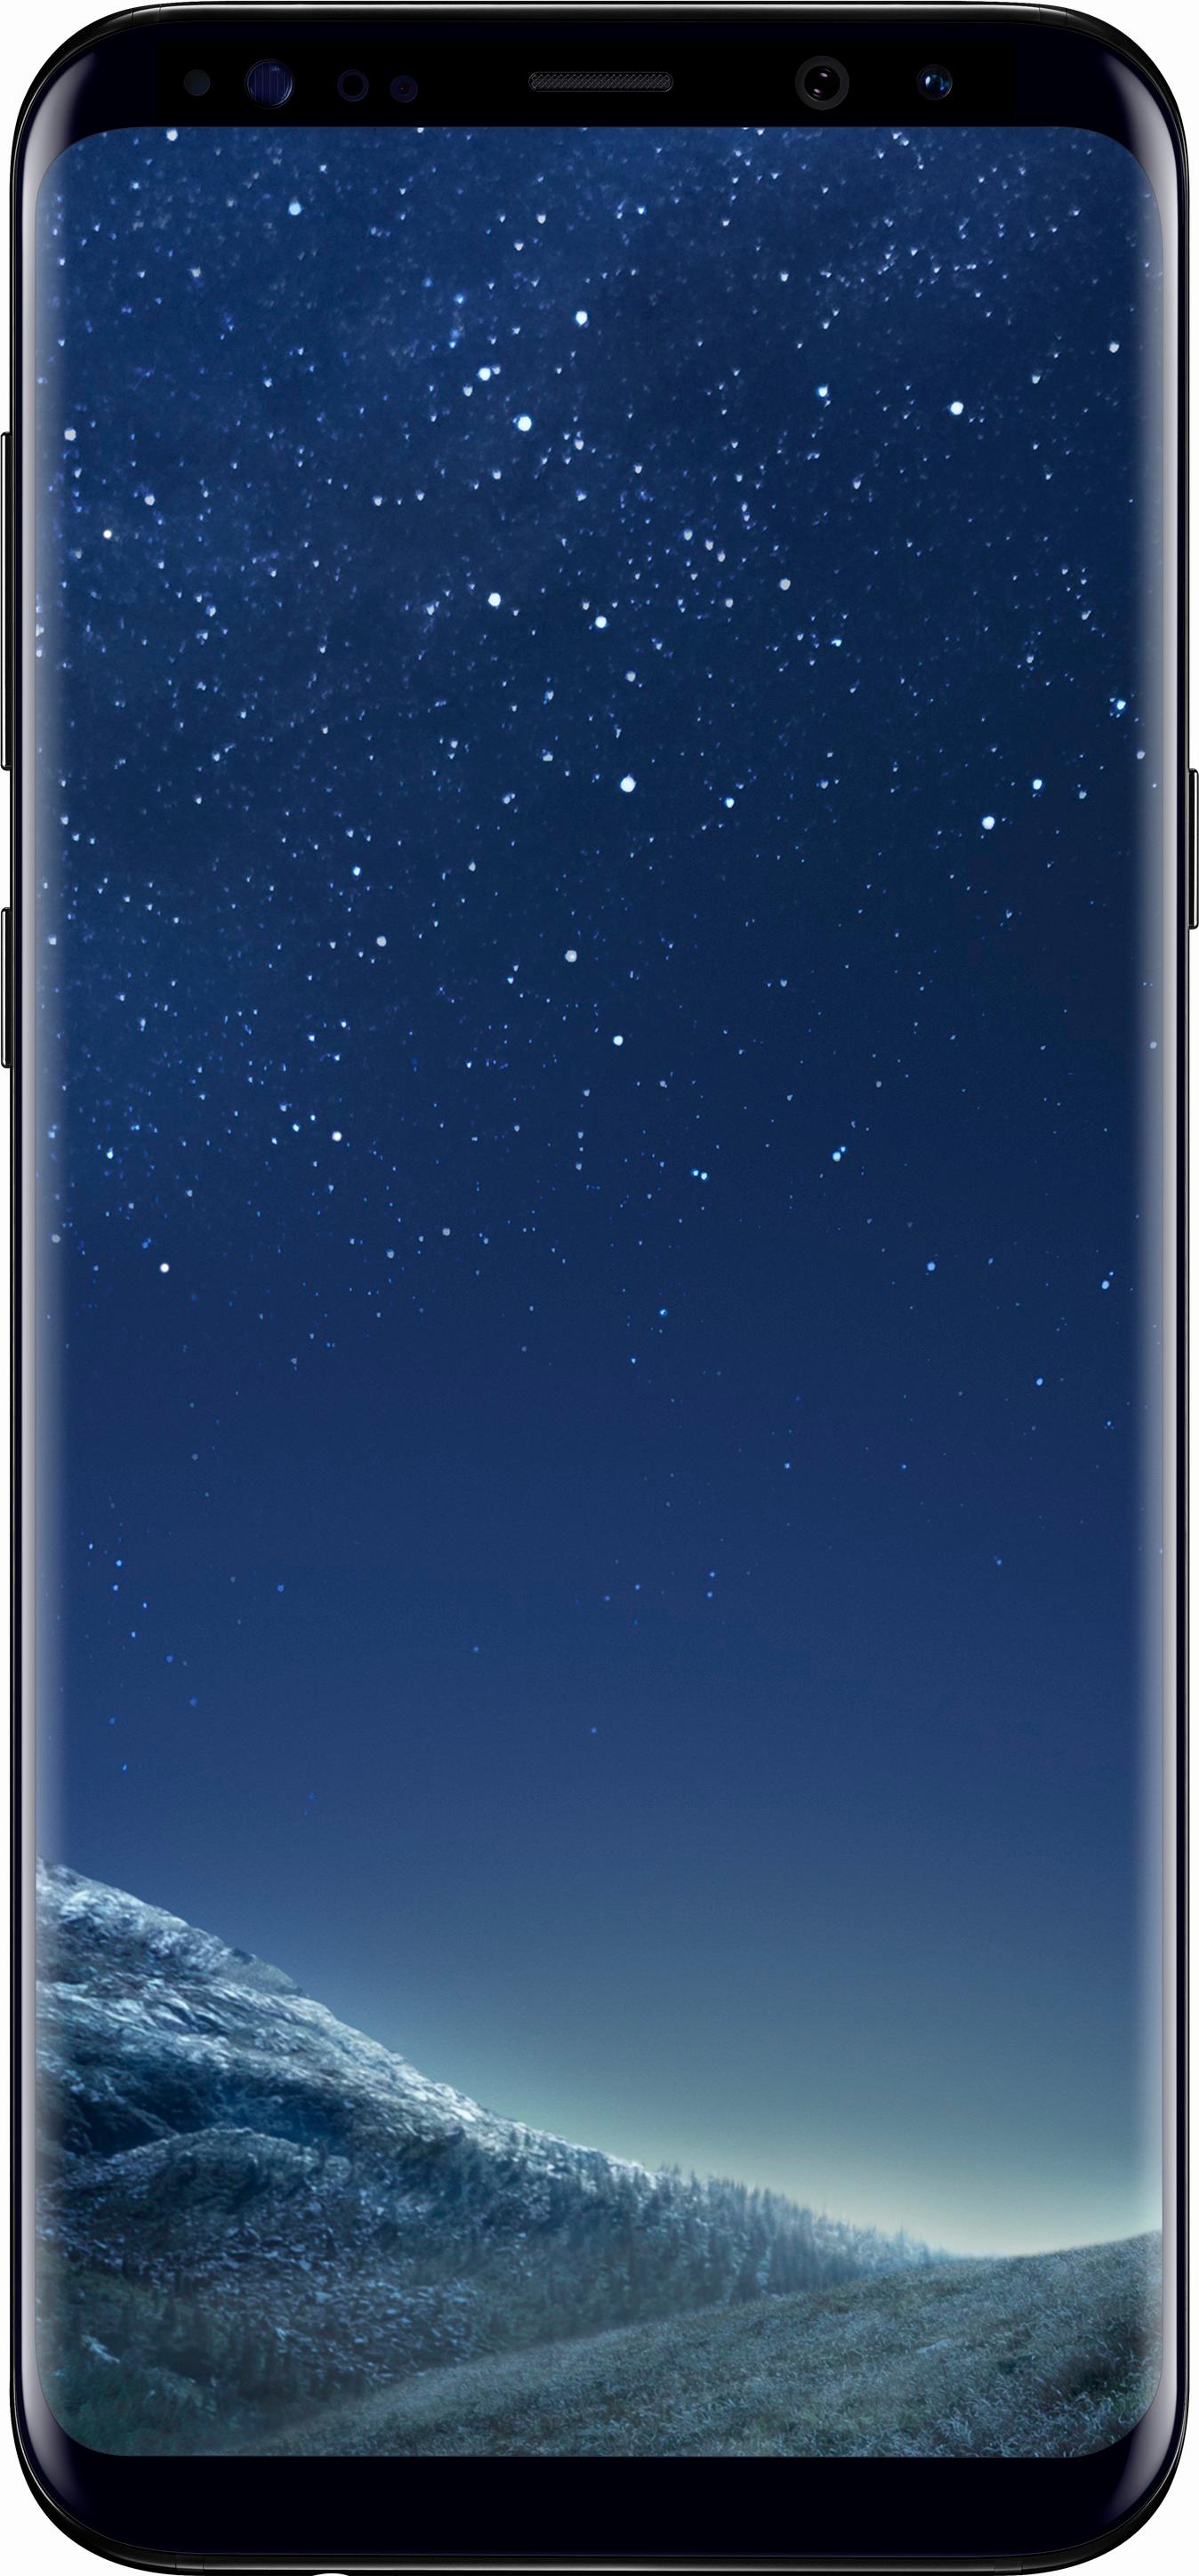 Total Wireless - Samsung Galaxy S8 Plus 4G with 64GB Memory Prepaid Cell Phone - Midnight Black